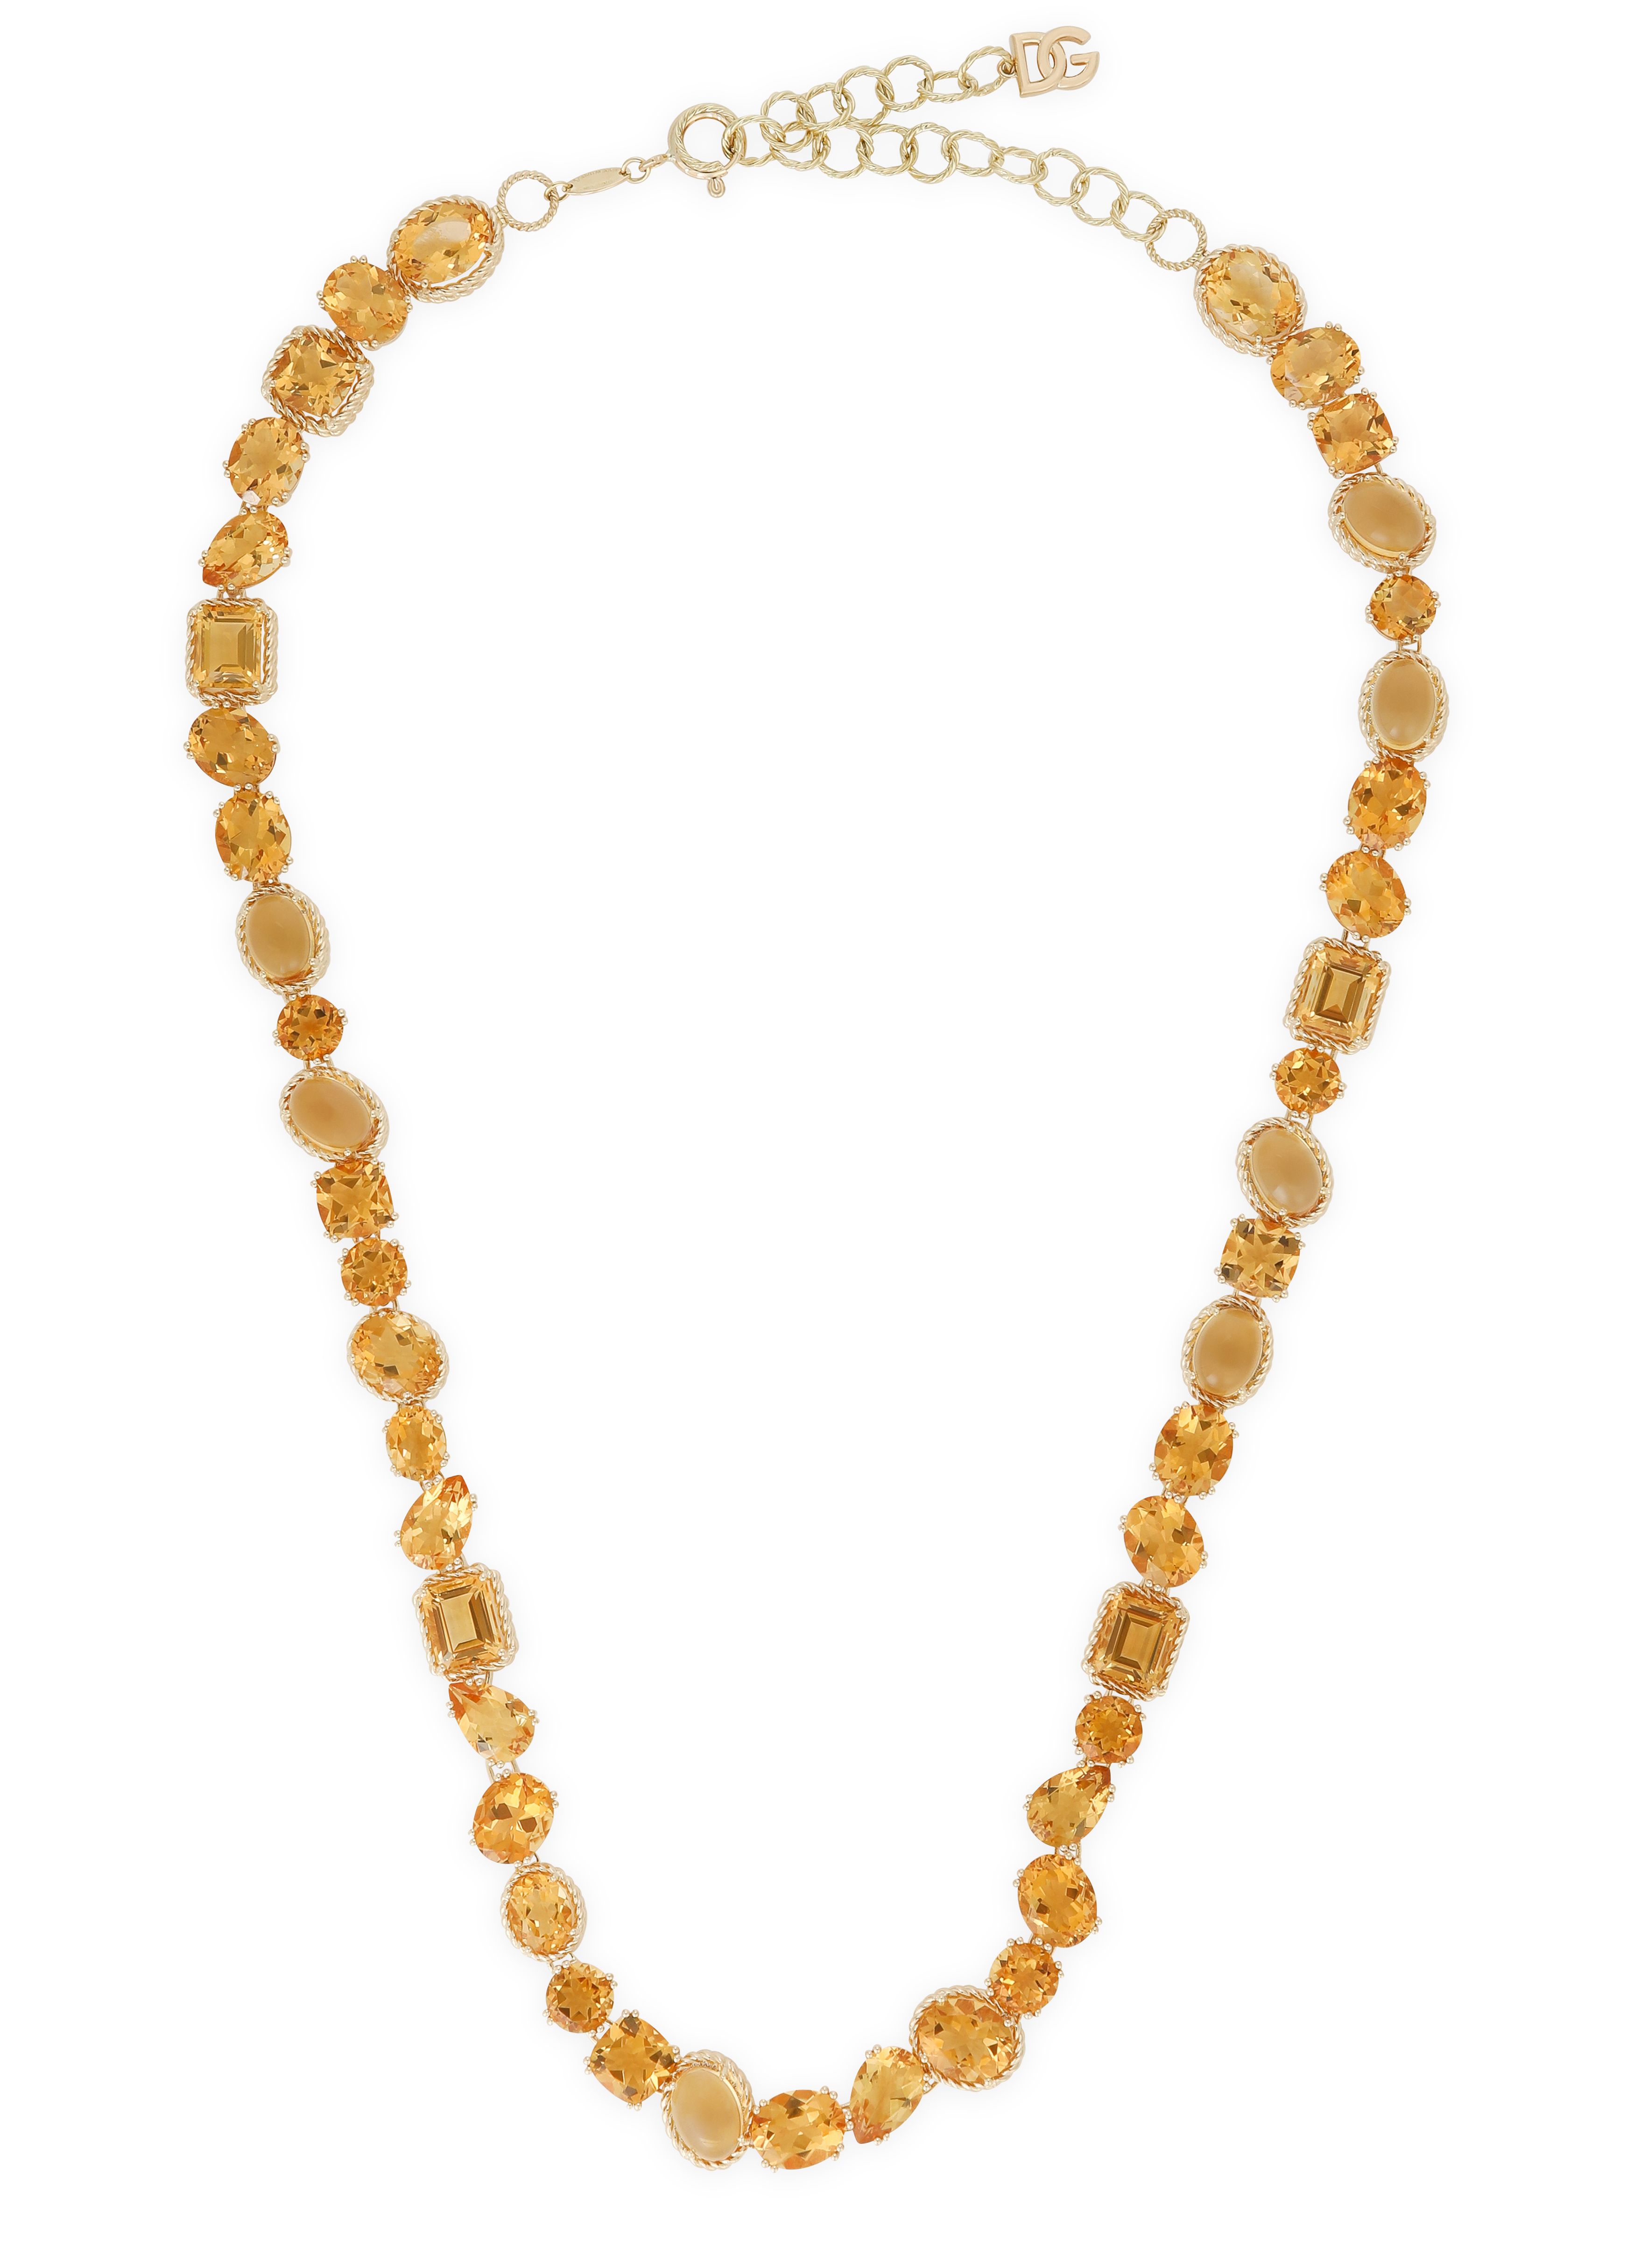 Dolce & Gabbana Anna necklace in yellow gold 18kt